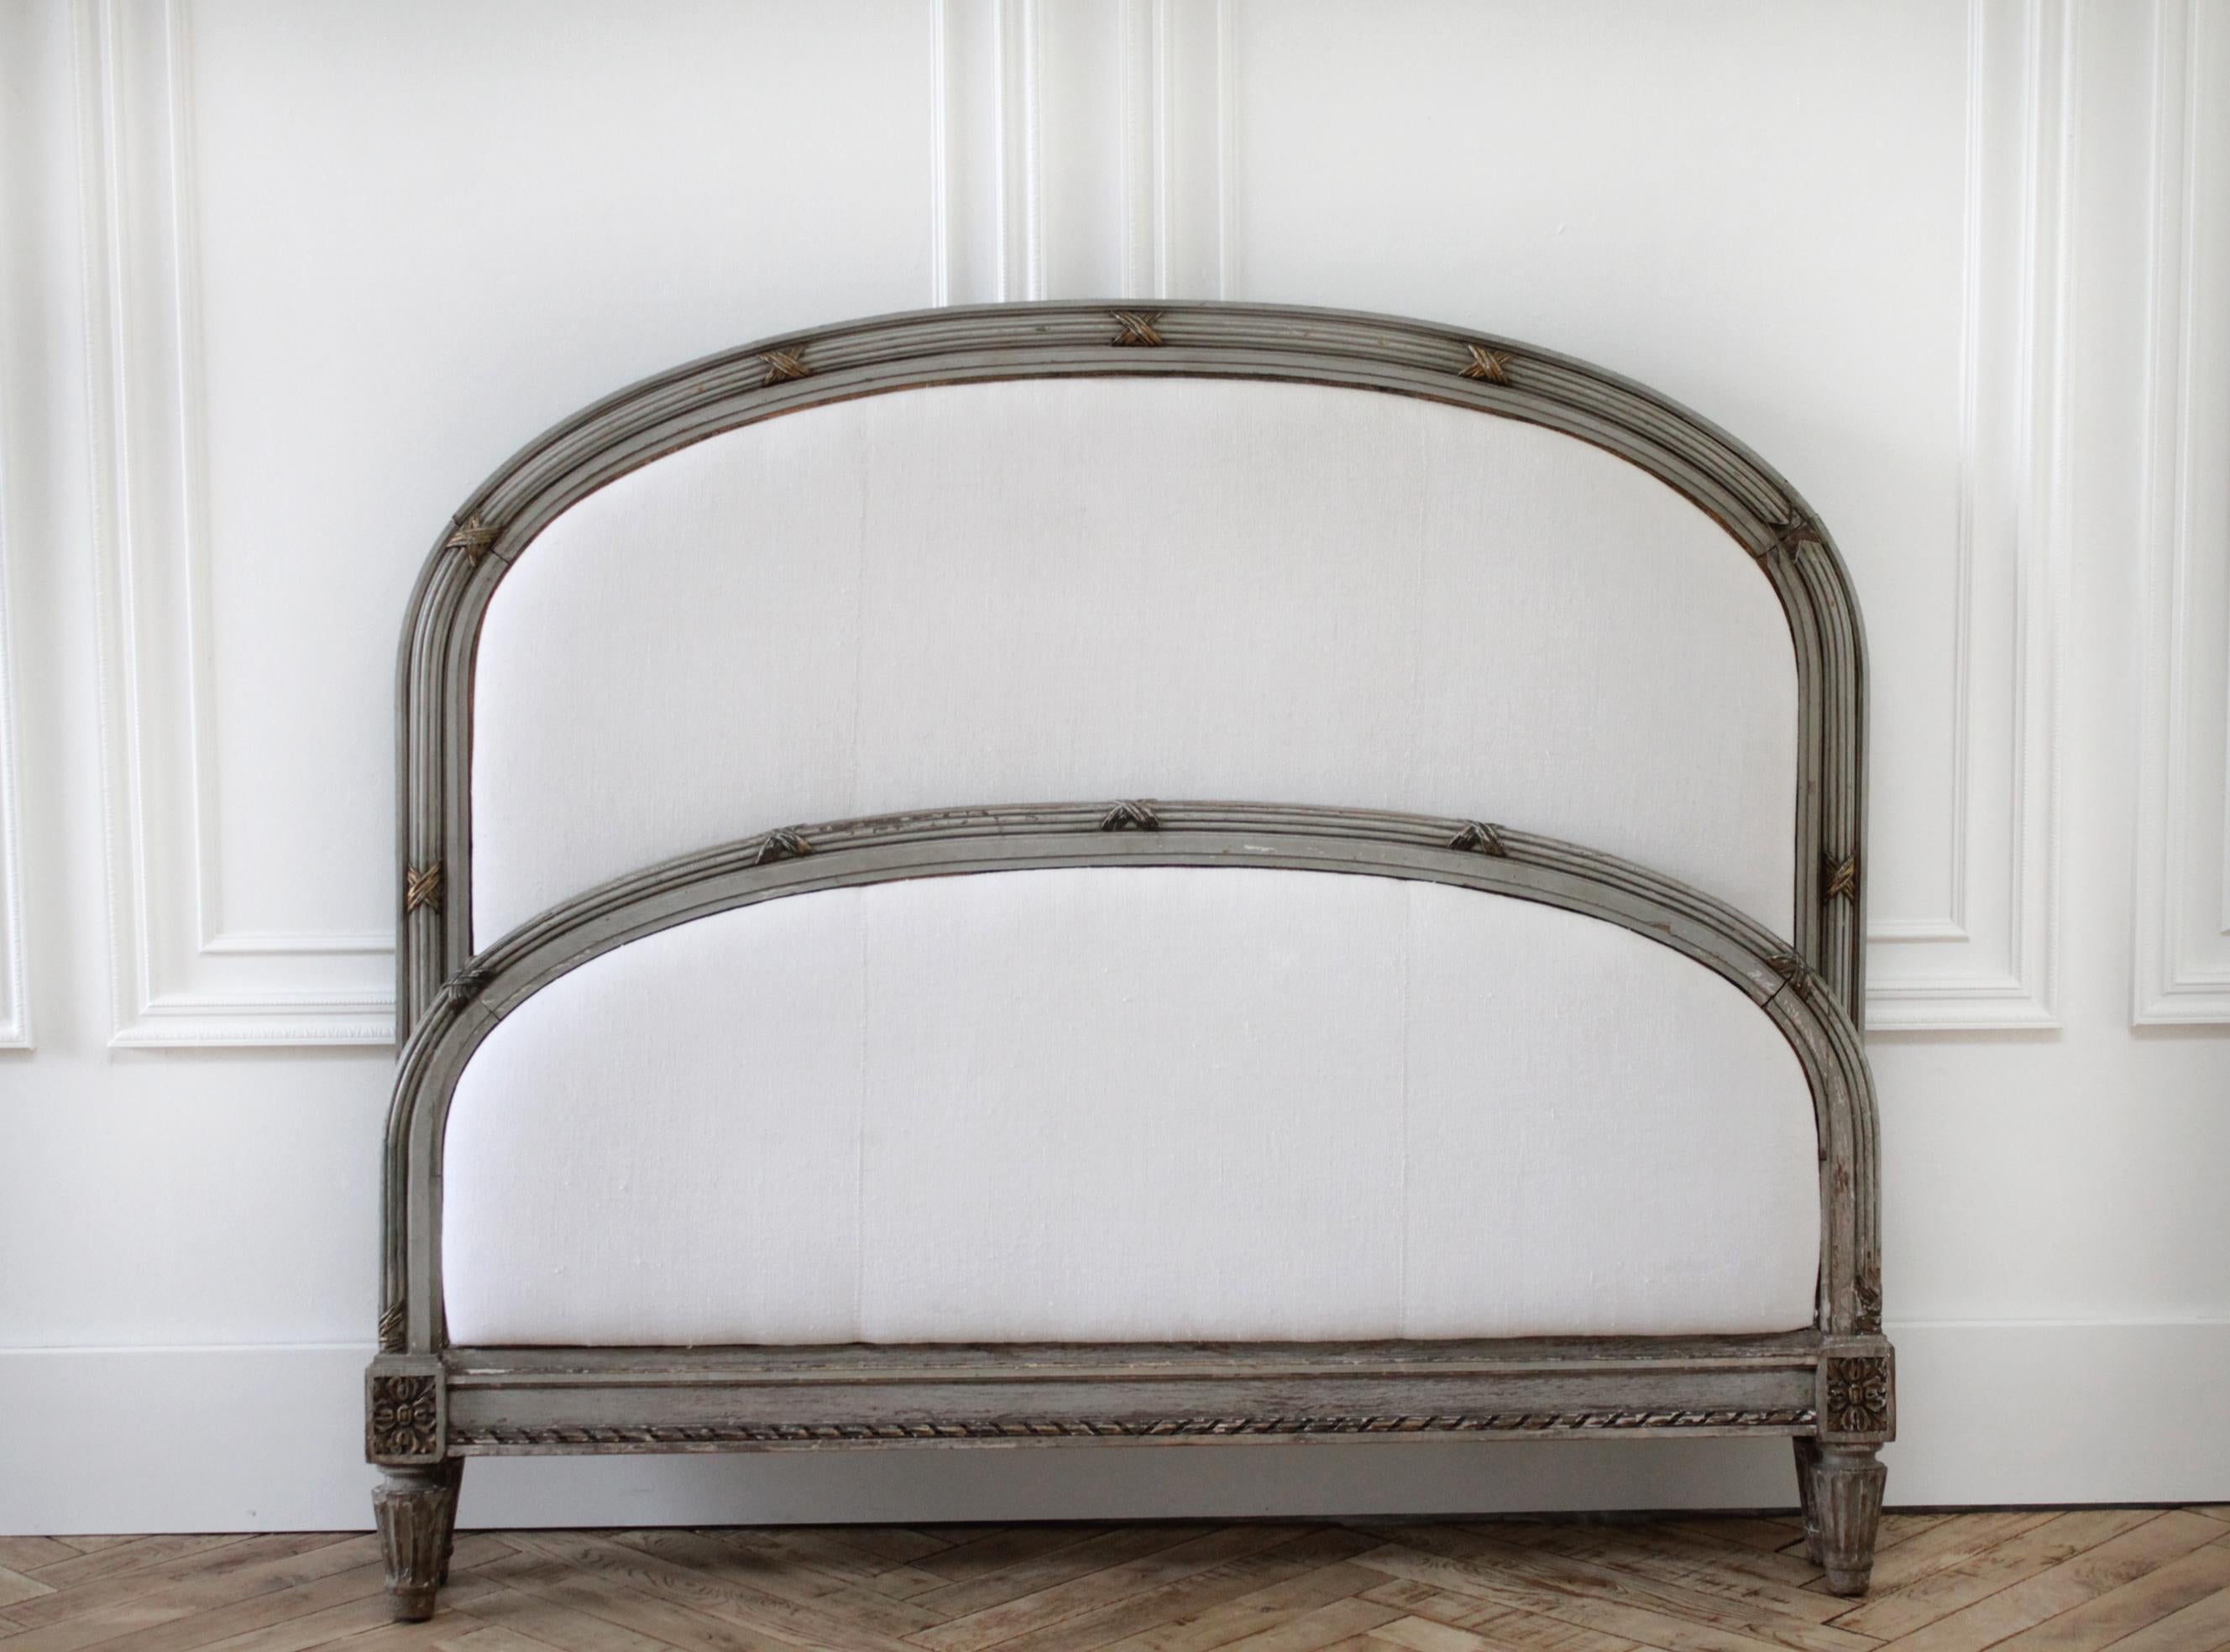 Italian 19th Century Louis XVI Style Painted and Upholstered Full Size Bed